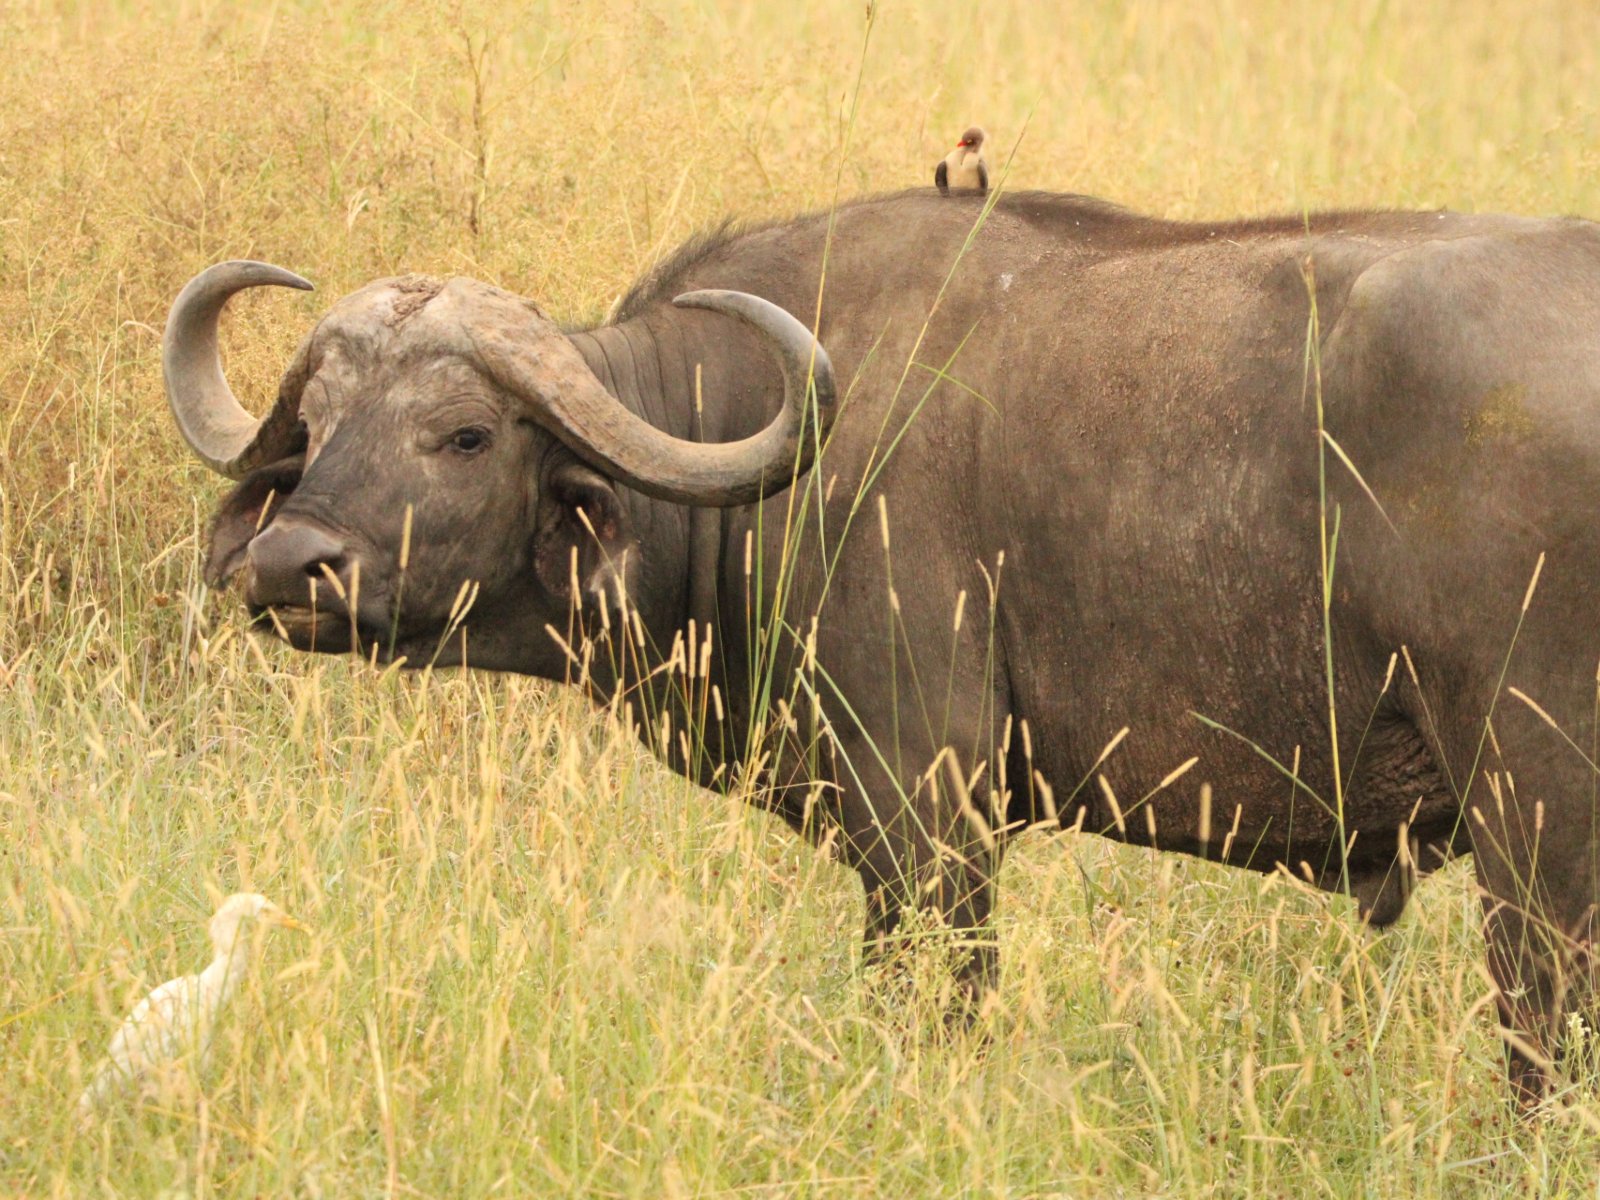 A water buffalo with some birds.